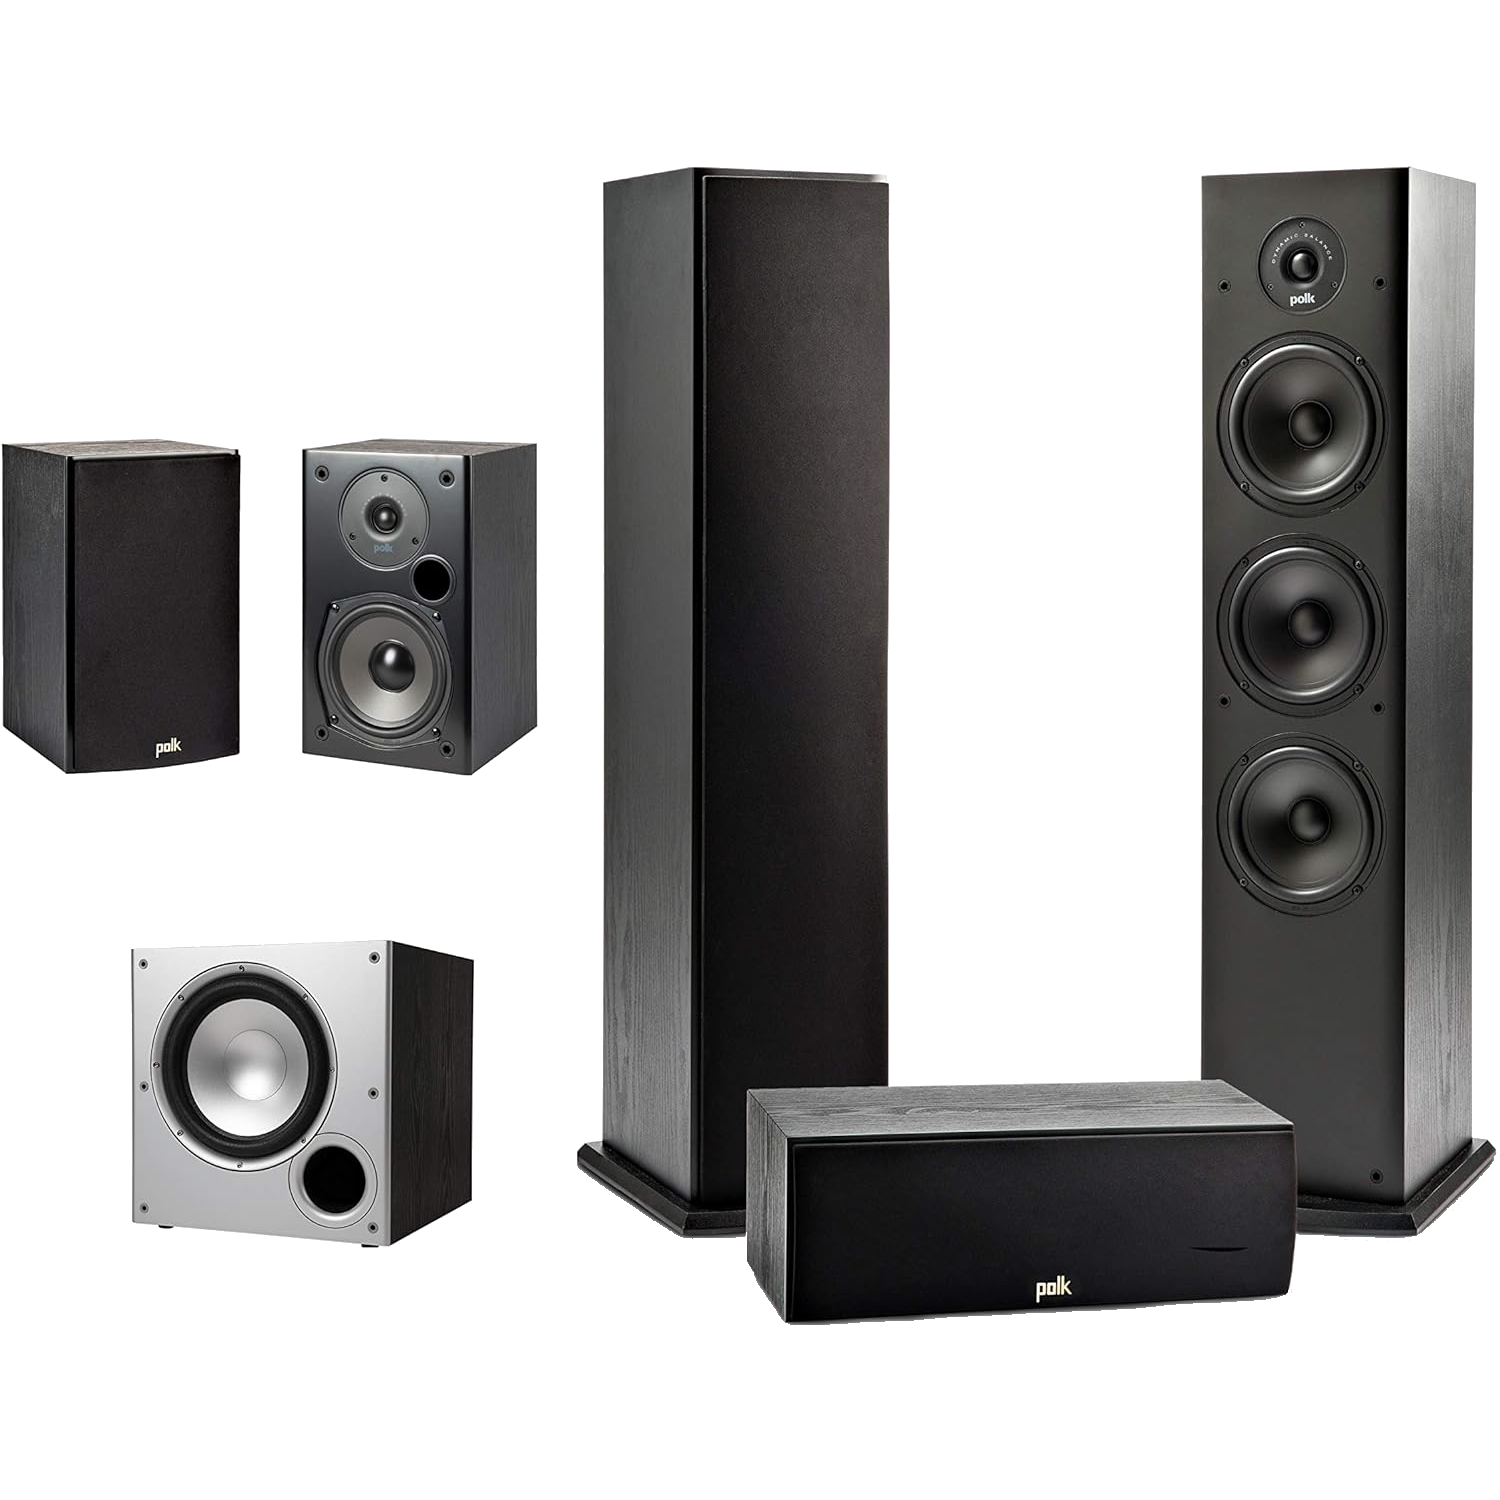 The Best Home Theater Starter Kits of 2021